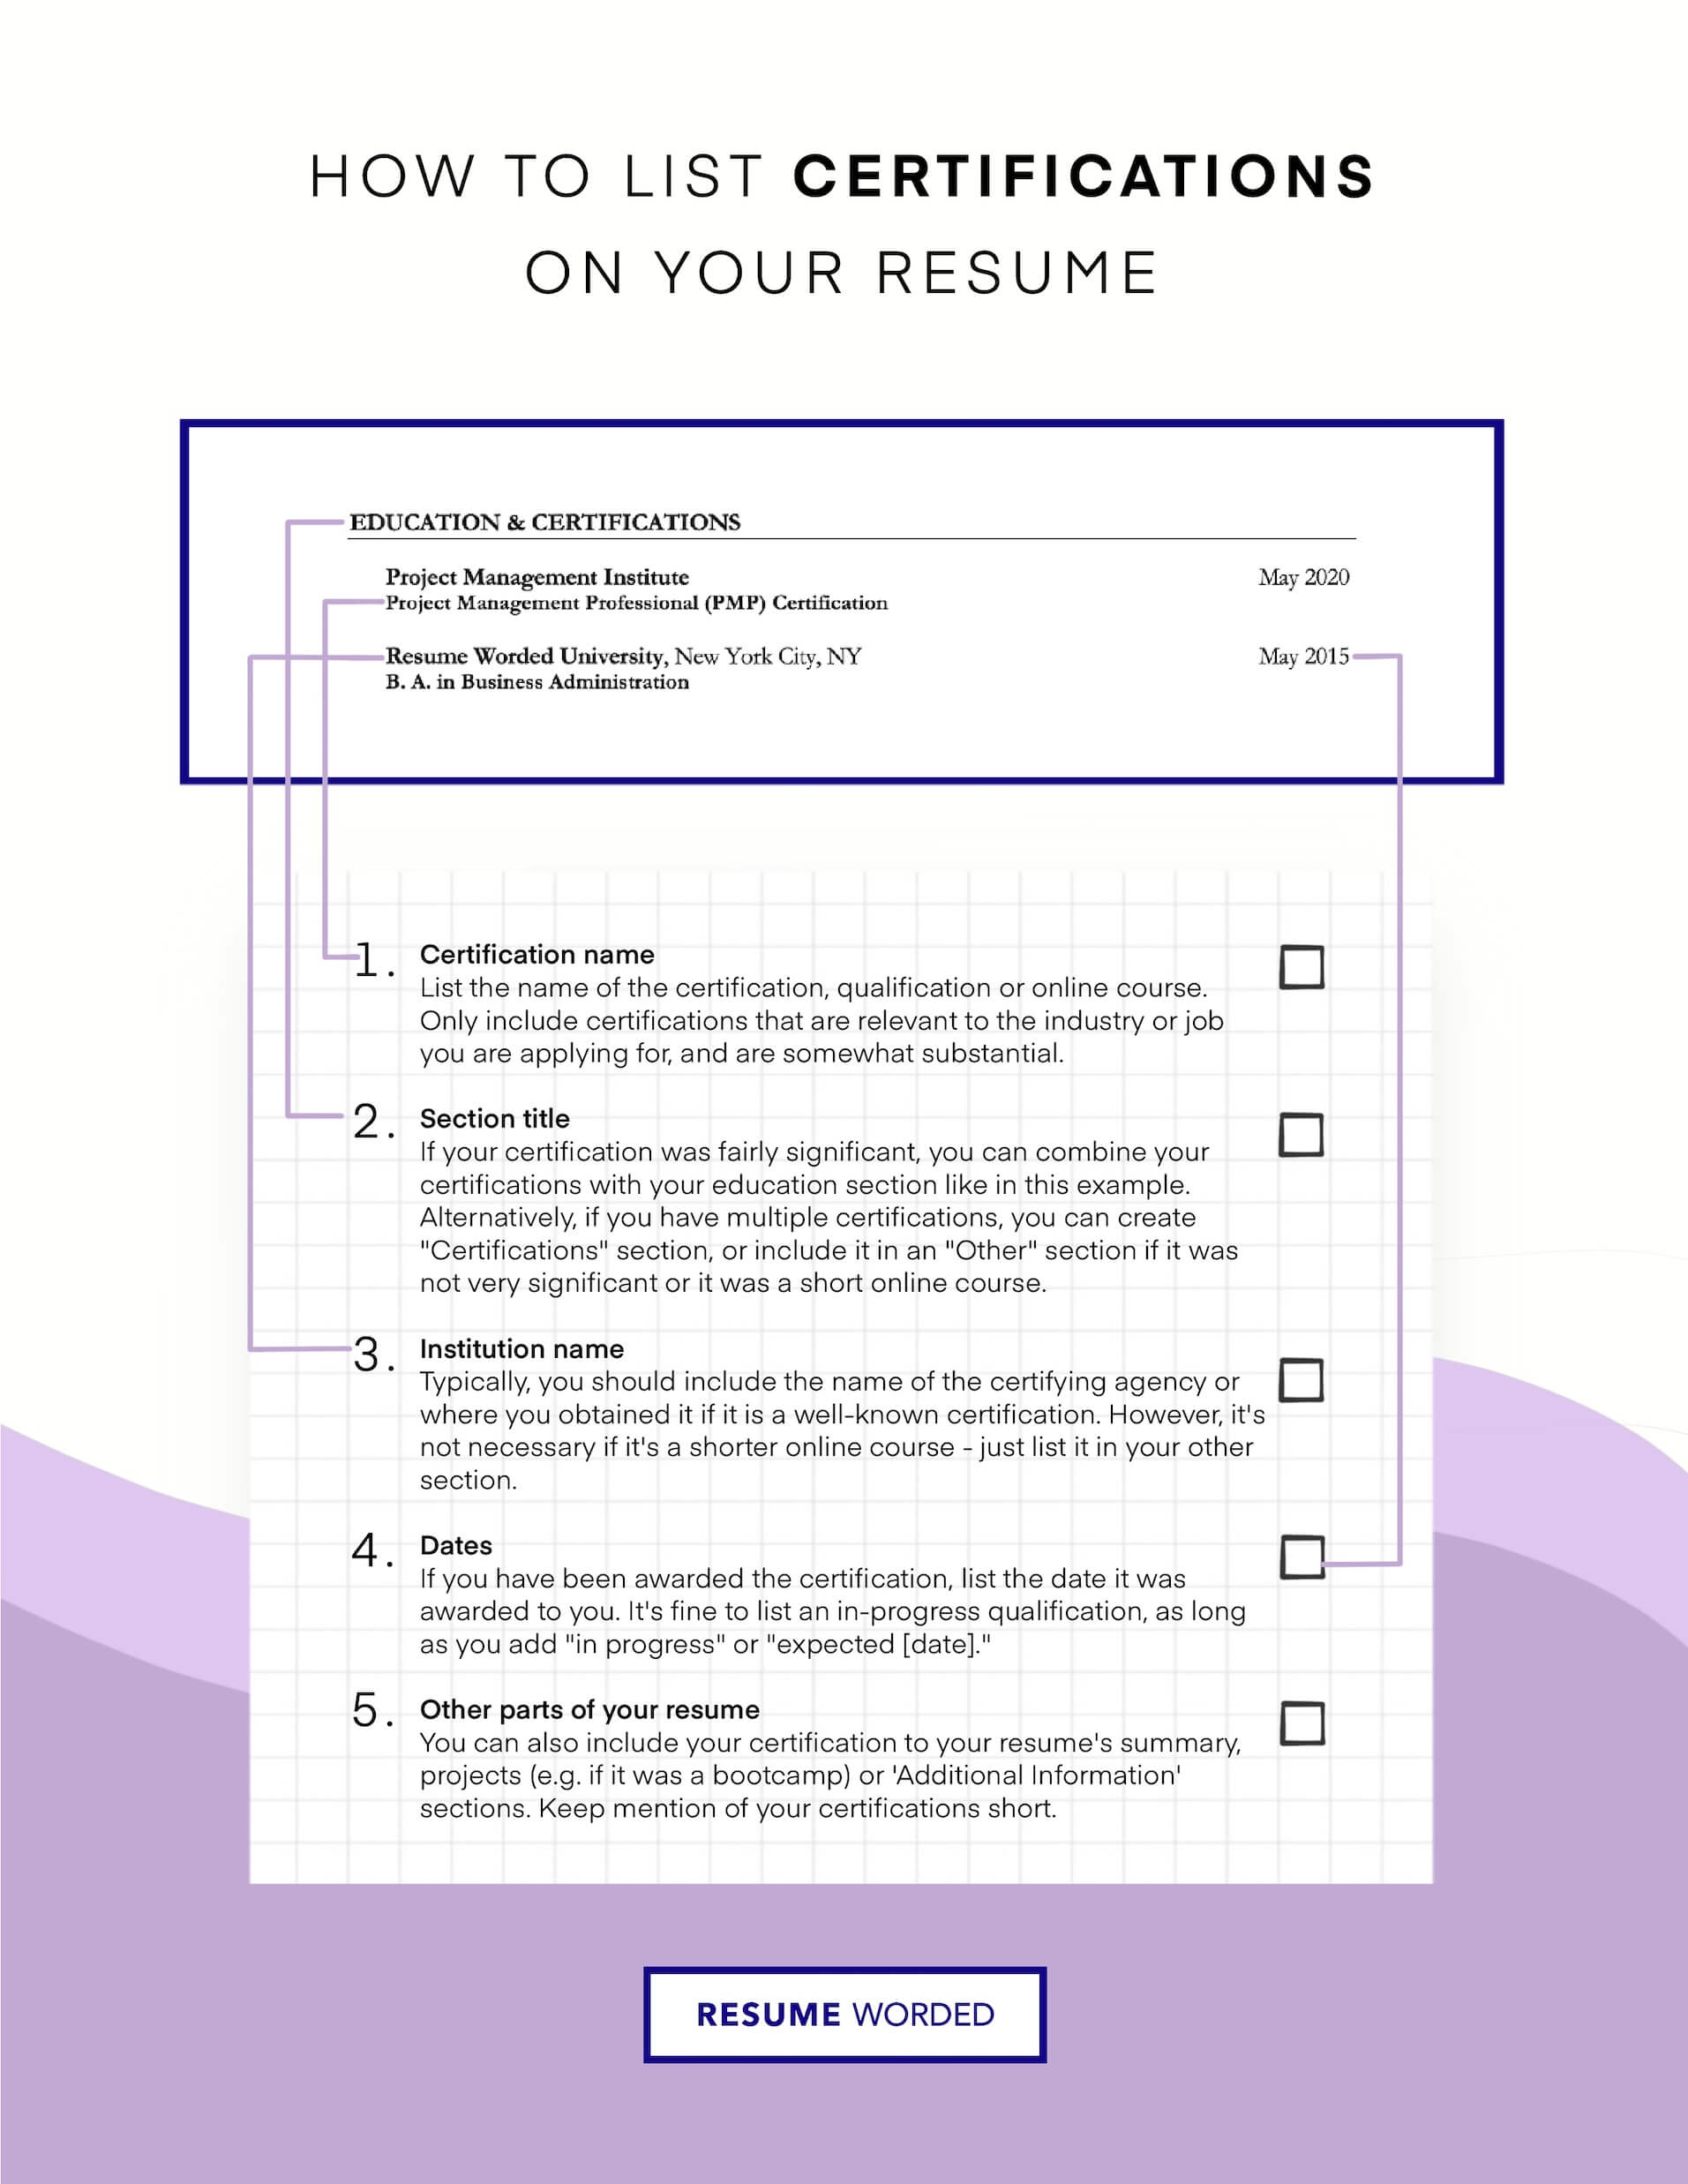 Get certified in the healthcare field. - Healthcare Customer Service Rep Resume